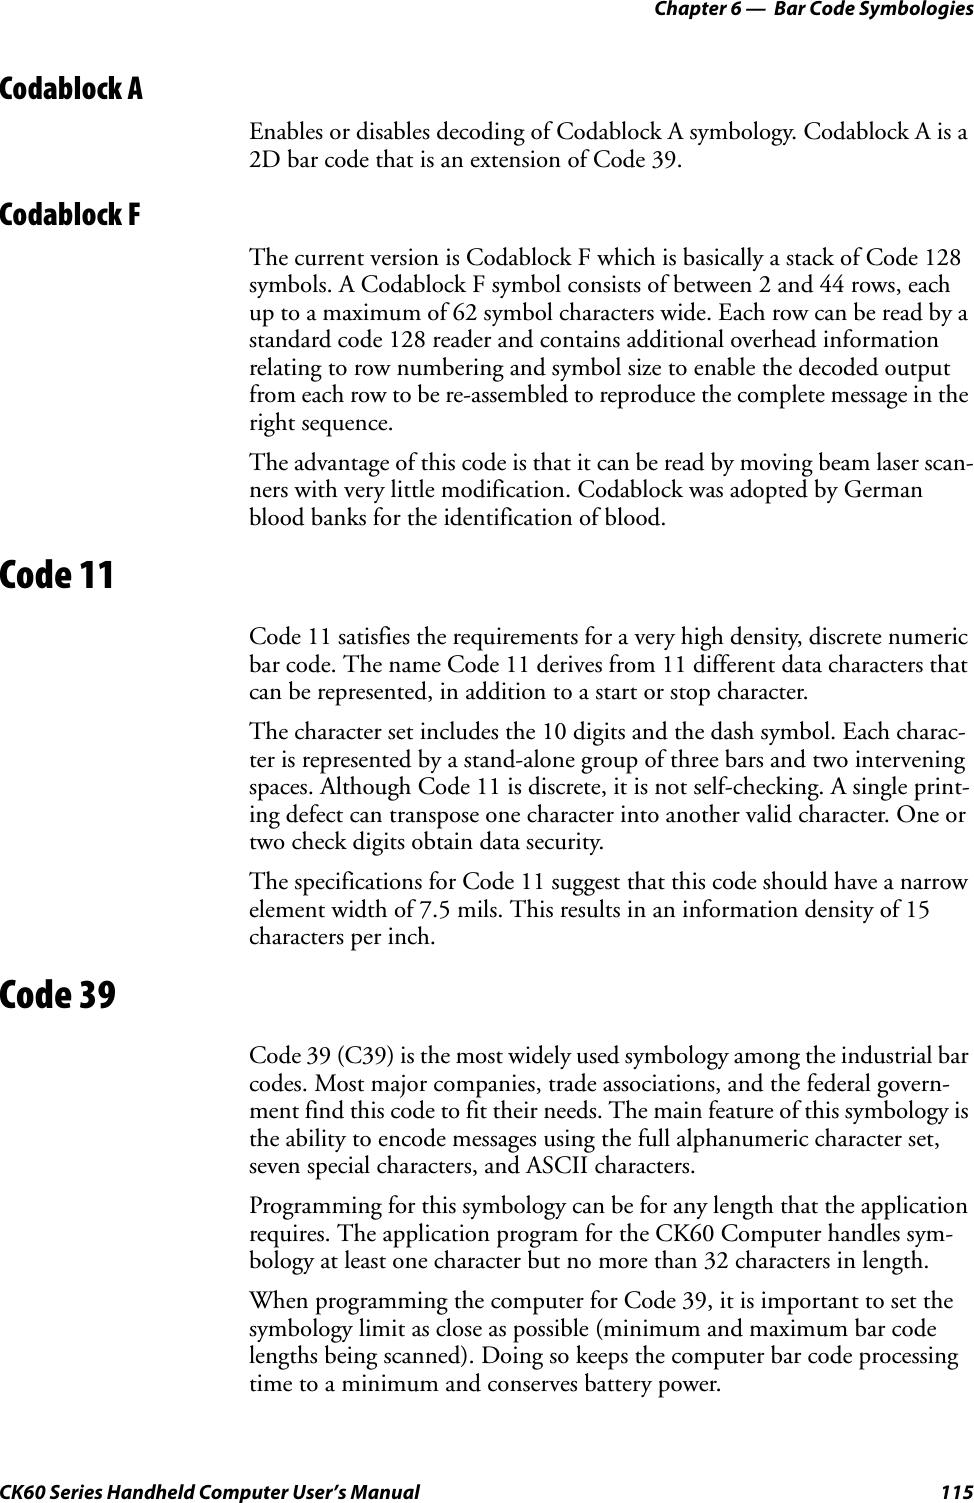 Chapter 6 —  Bar Code SymbologiesCK60 Series Handheld Computer User’s Manual 115Codablock AEnables or disables decoding of Codablock A symbology. Codablock A is a 2D bar code that is an extension of Code 39.Codablock FThe current version is Codablock F which is basically a stack of Code 128 symbols. A Codablock F symbol consists of between 2 and 44 rows, each up to a maximum of 62 symbol characters wide. Each row can be read by a standard code 128 reader and contains additional overhead information relating to row numbering and symbol size to enable the decoded output from each row to be re-assembled to reproduce the complete message in the right sequence.The advantage of this code is that it can be read by moving beam laser scan-ners with very little modification. Codablock was adopted by German blood banks for the identification of blood.Code 11Code 11 satisfies the requirements for a very high density, discrete numeric bar code. The name Code 11 derives from 11 different data characters that can be represented, in addition to a start or stop character.The character set includes the 10 digits and the dash symbol. Each charac-ter is represented by a stand-alone group of three bars and two intervening spaces. Although Code 11 is discrete, it is not self-checking. A single print-ing defect can transpose one character into another valid character. One or two check digits obtain data security.The specifications for Code 11 suggest that this code should have a narrow element width of 7.5 mils. This results in an information density of 15 characters per inch.Code 39Code 39 (C39) is the most widely used symbology among the industrial bar codes. Most major companies, trade associations, and the federal govern-ment find this code to fit their needs. The main feature of this symbology is the ability to encode messages using the full alphanumeric character set, seven special characters, and ASCII characters.Programming for this symbology can be for any length that the application requires. The application program for the CK60 Computer handles sym-bology at least one character but no more than 32 characters in length.When programming the computer for Code 39, it is important to set the symbology limit as close as possible (minimum and maximum bar code lengths being scanned). Doing so keeps the computer bar code processing time to a minimum and conserves battery power.